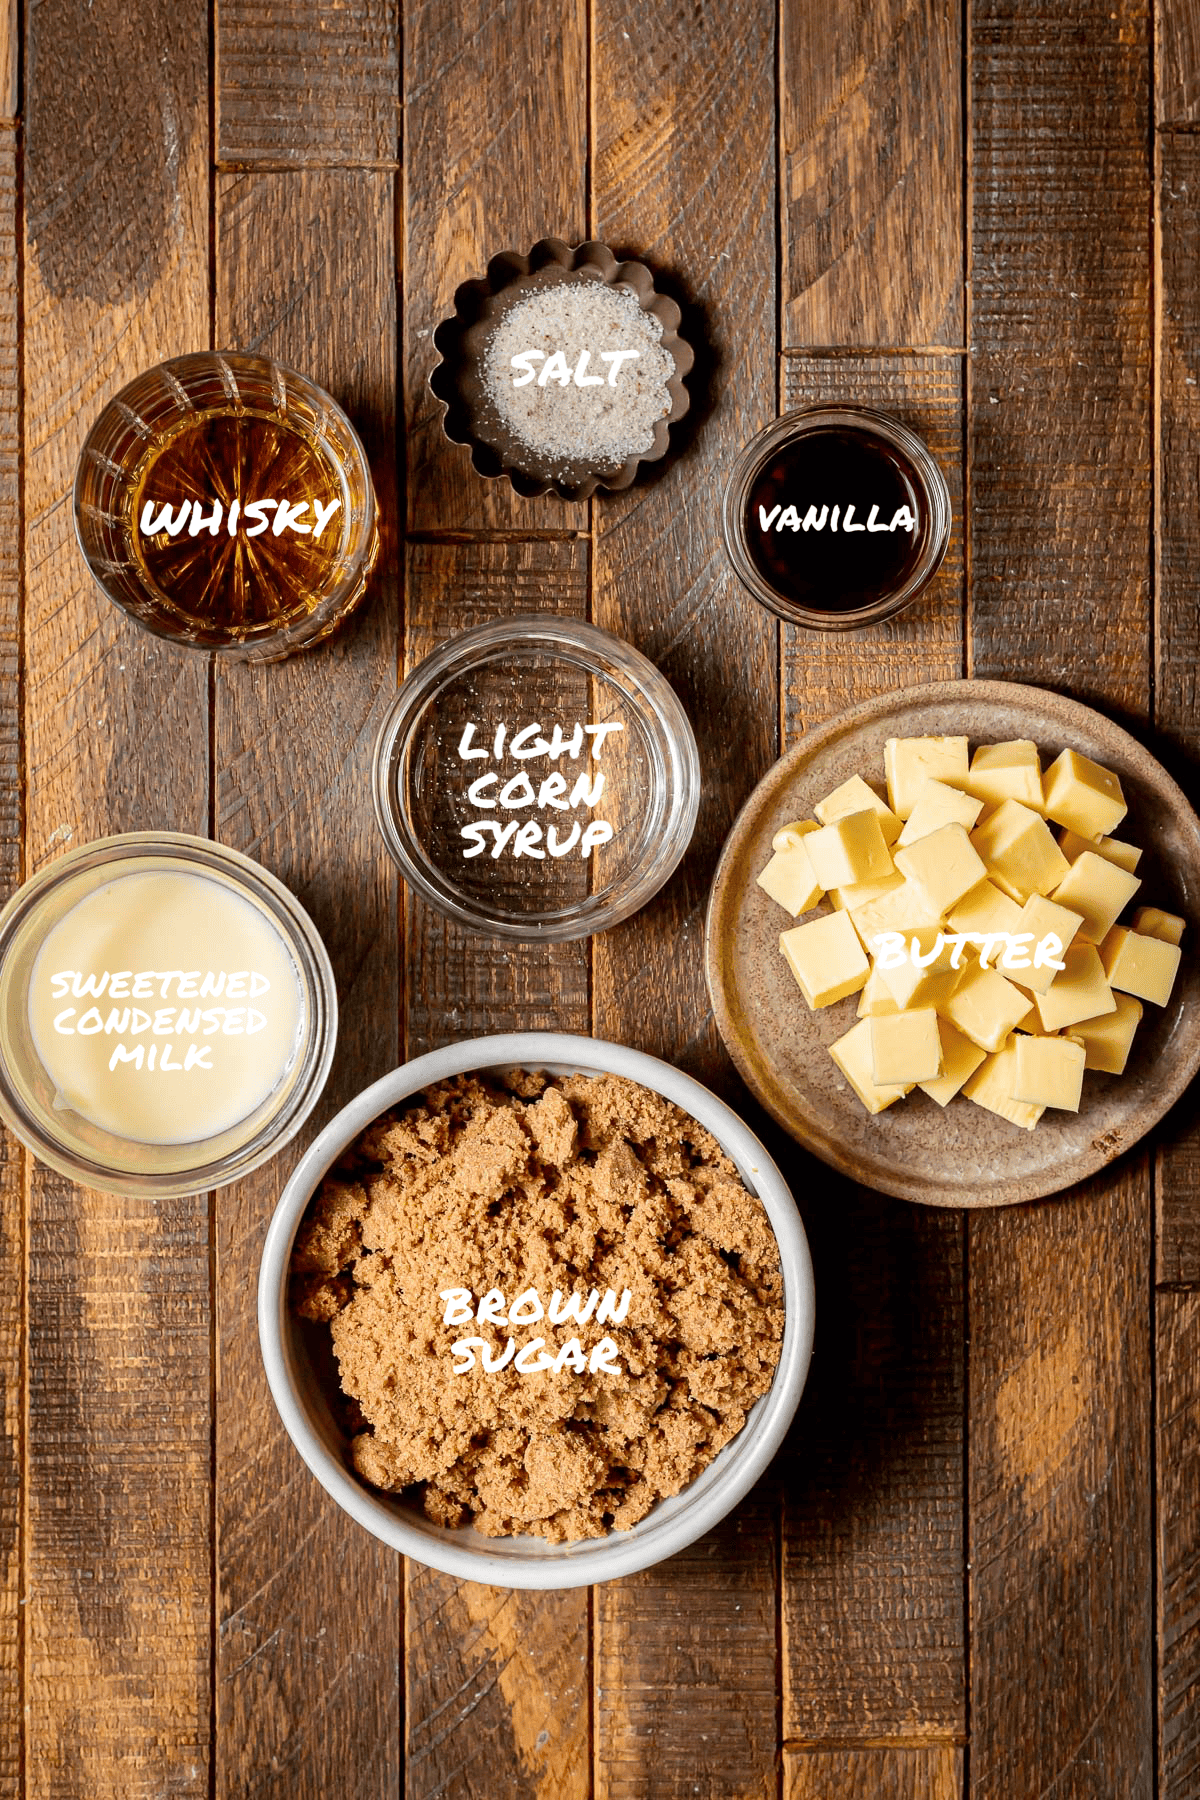 ingredients for salted whisky caramels.